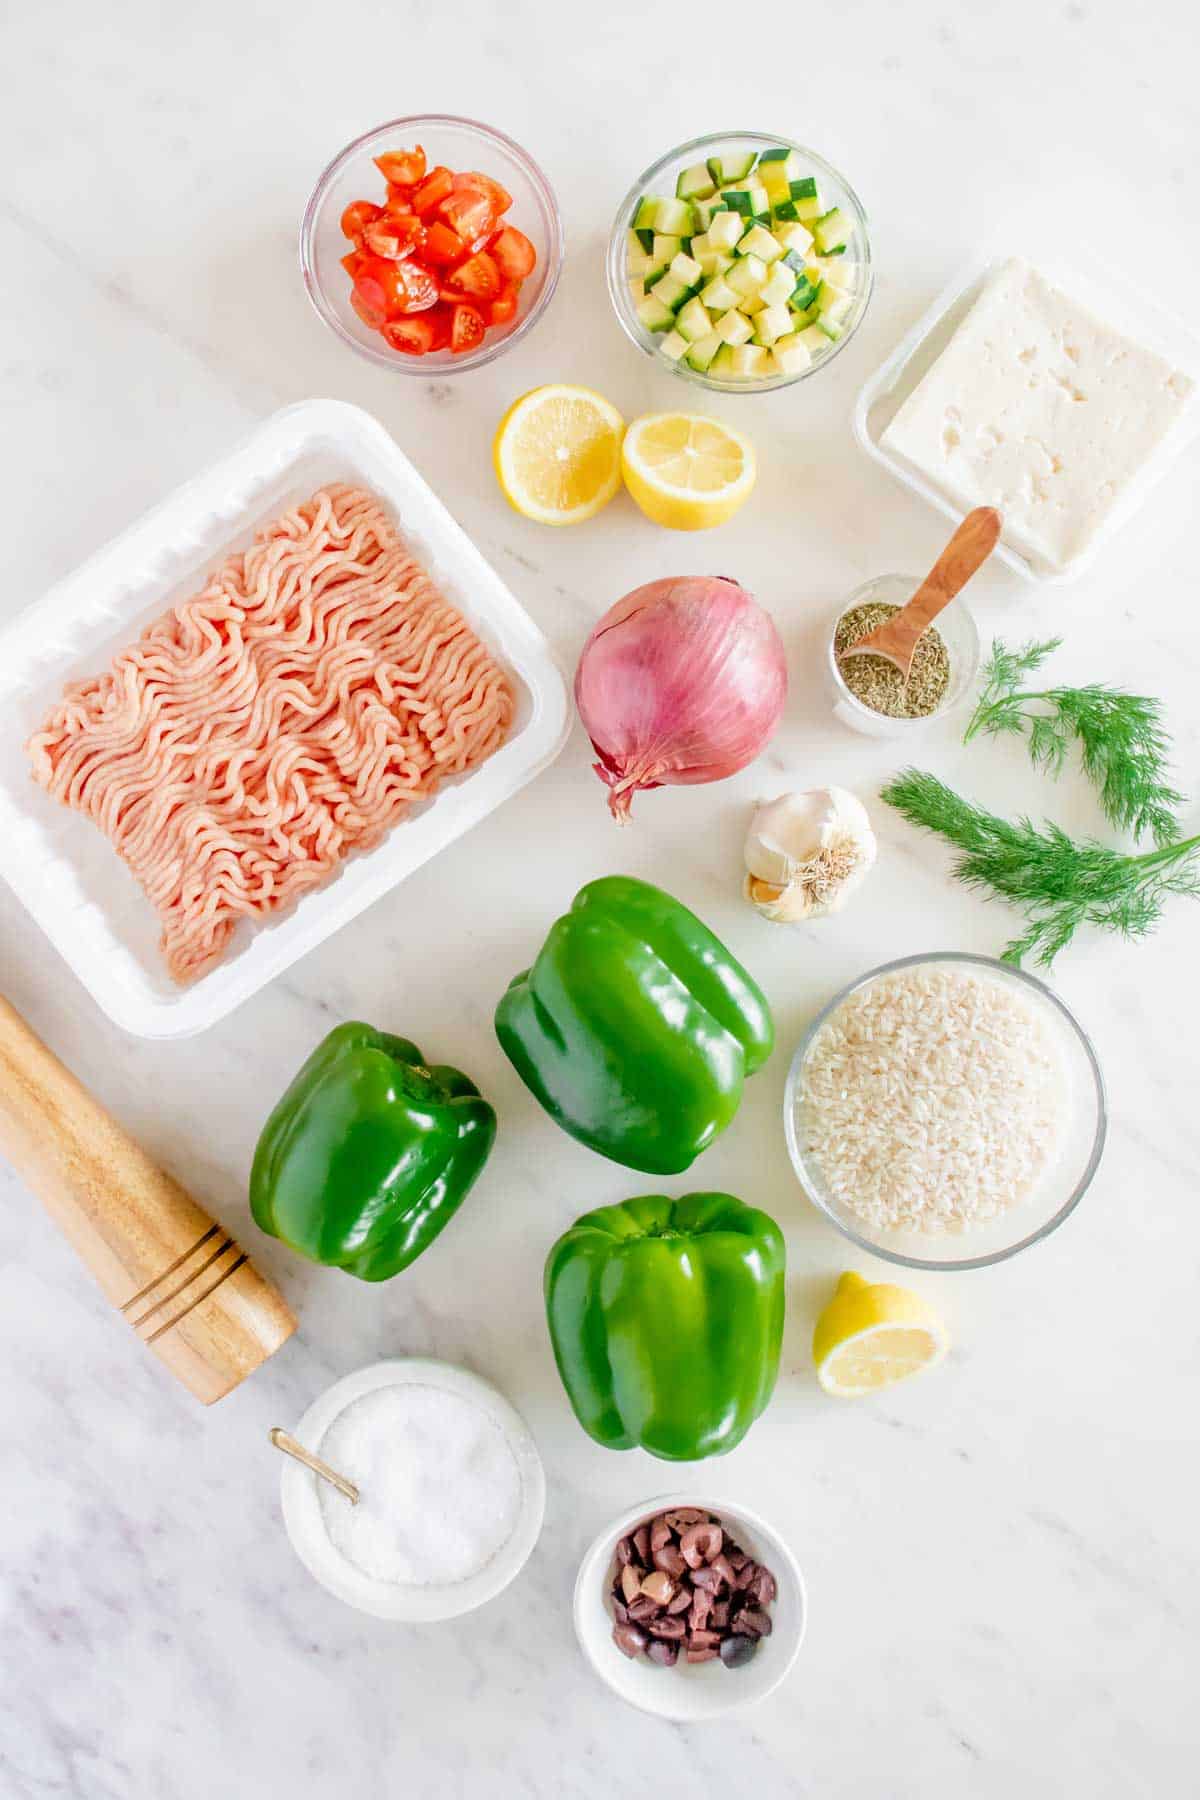 Ingredients for chicken stuffed peppers - chicken peppers, onion, lemon, feta cheese, garlic